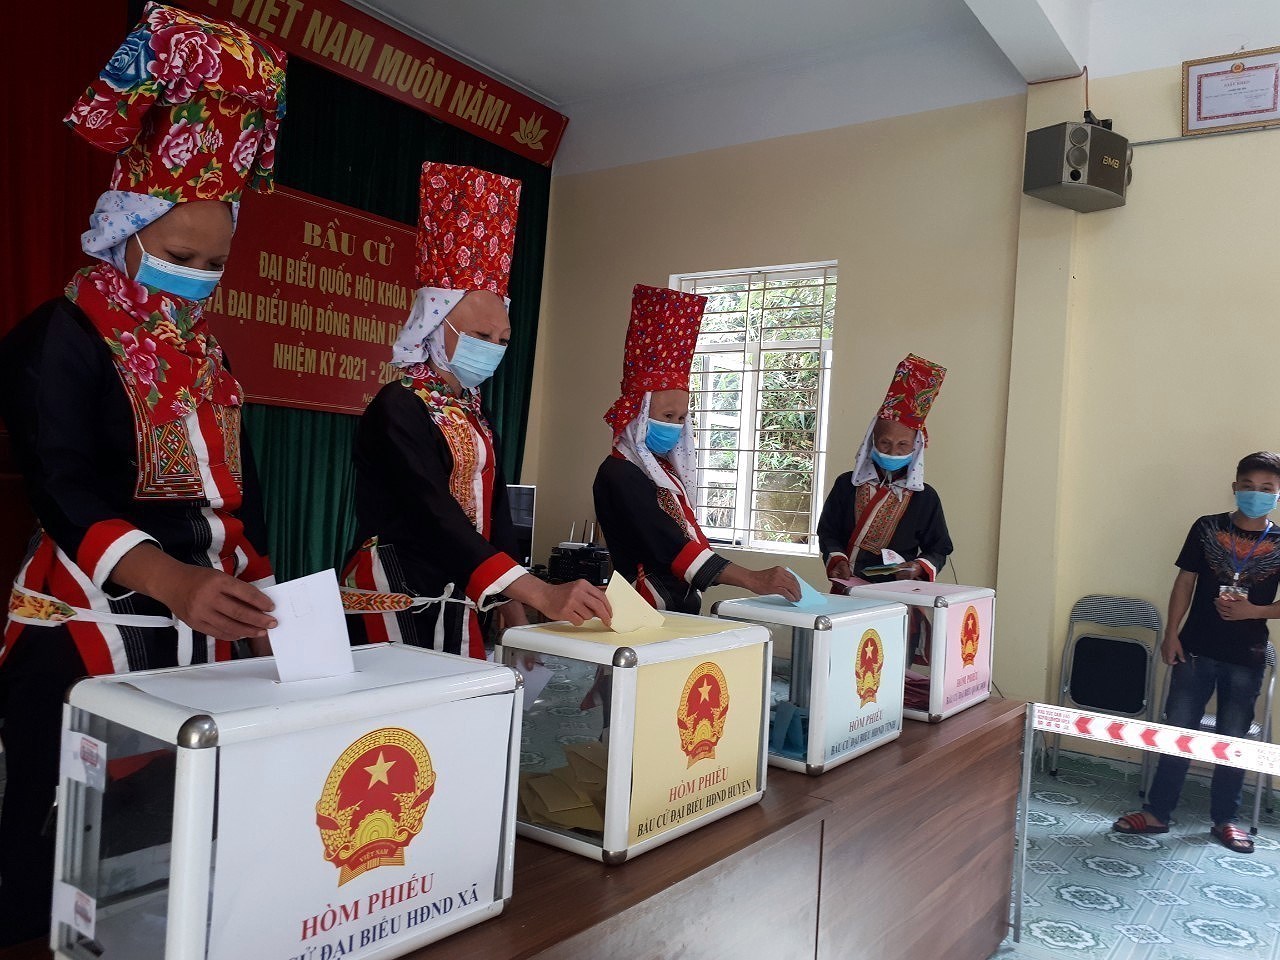 Ethnic minority voters nationwide go to poll hinh anh 9